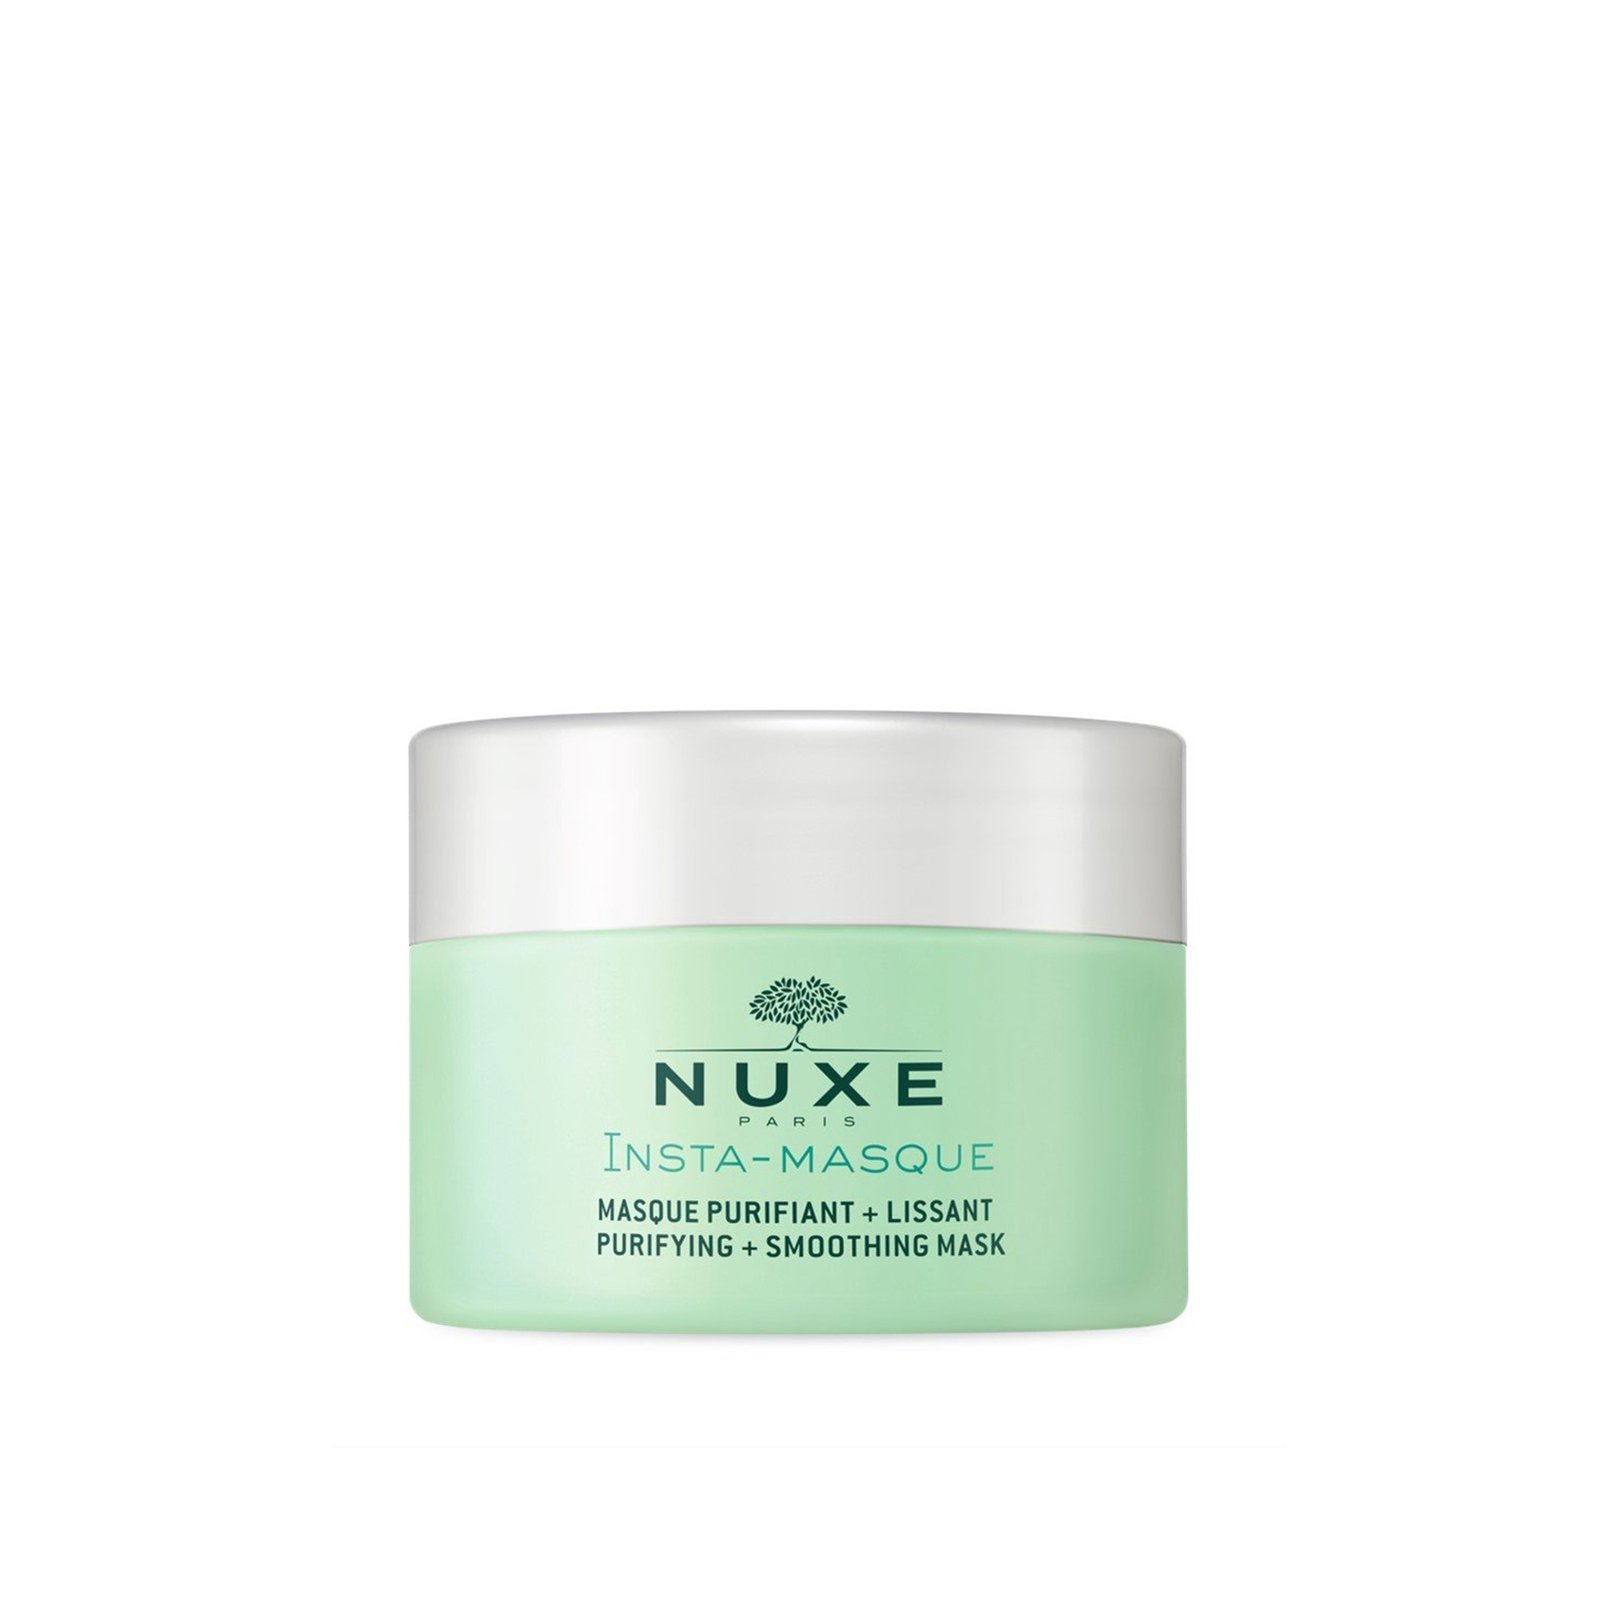 NUXE Insta-Masque Purifying + Smoothing Mask 50ml